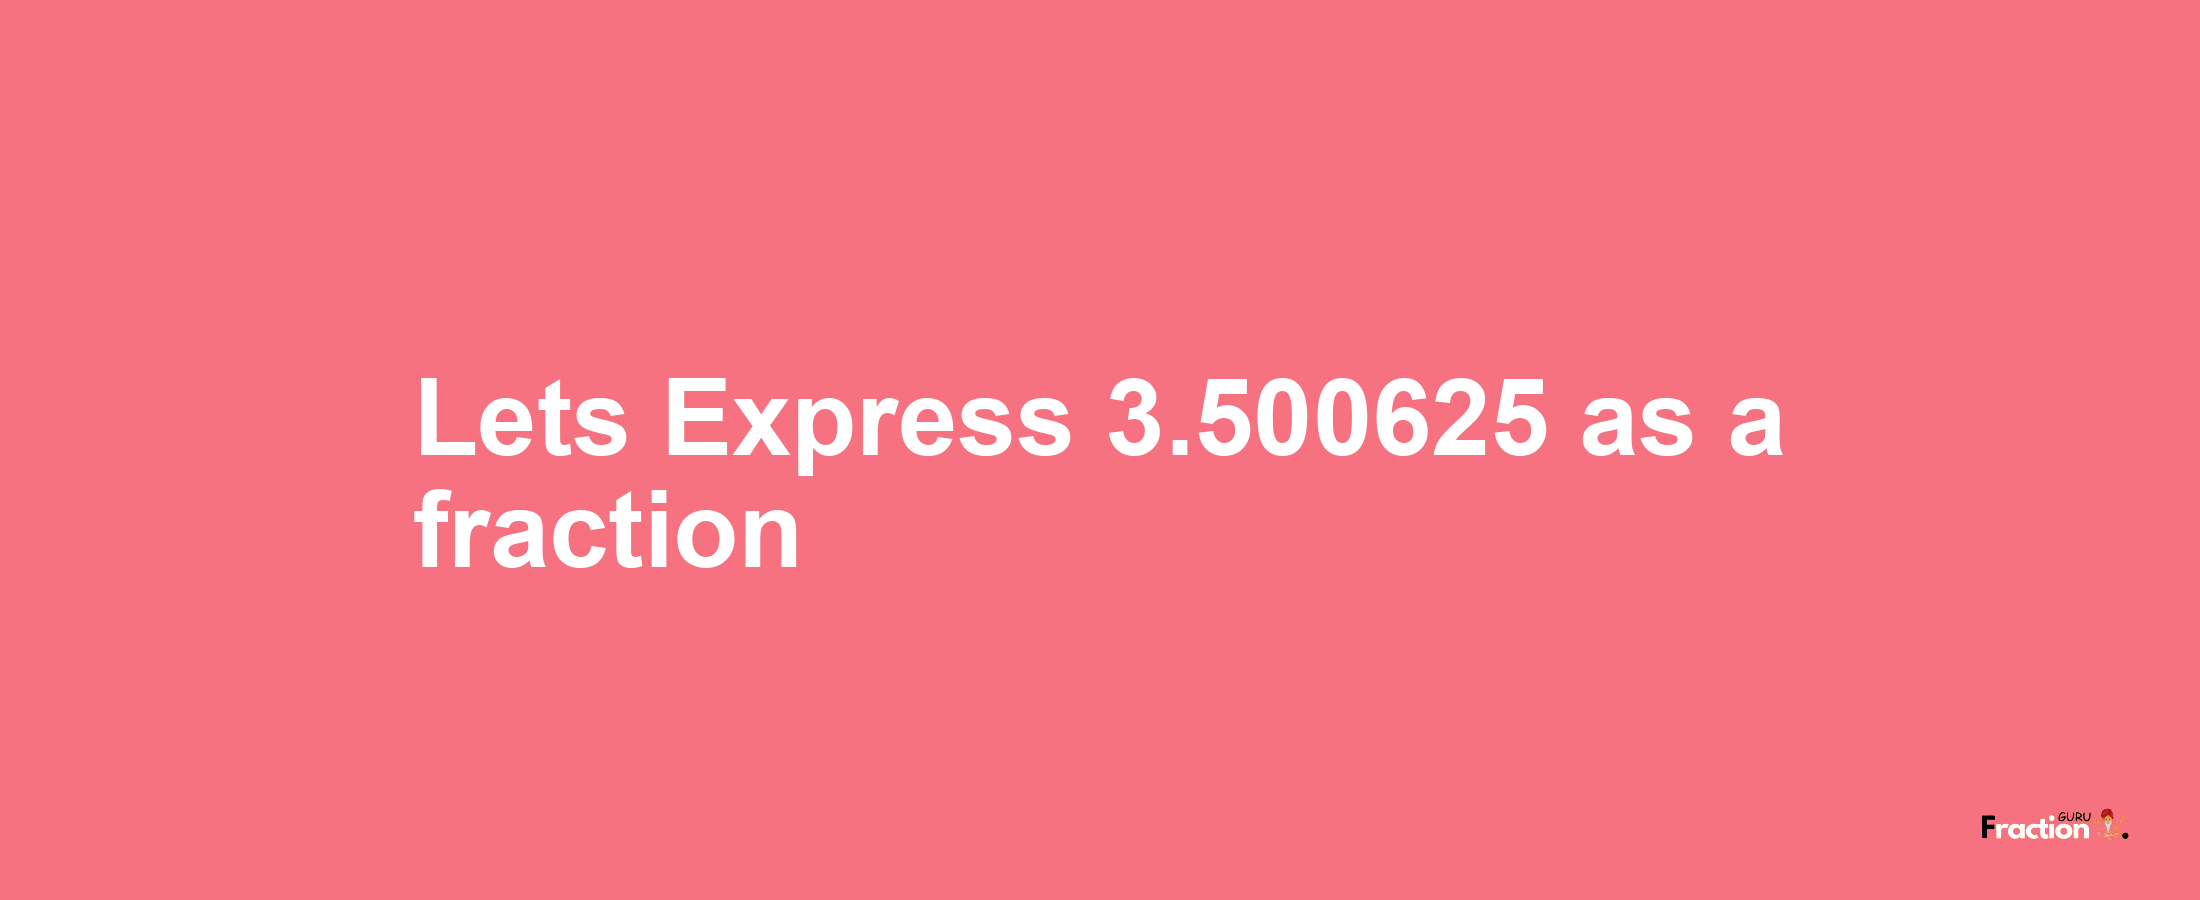 Lets Express 3.500625 as afraction